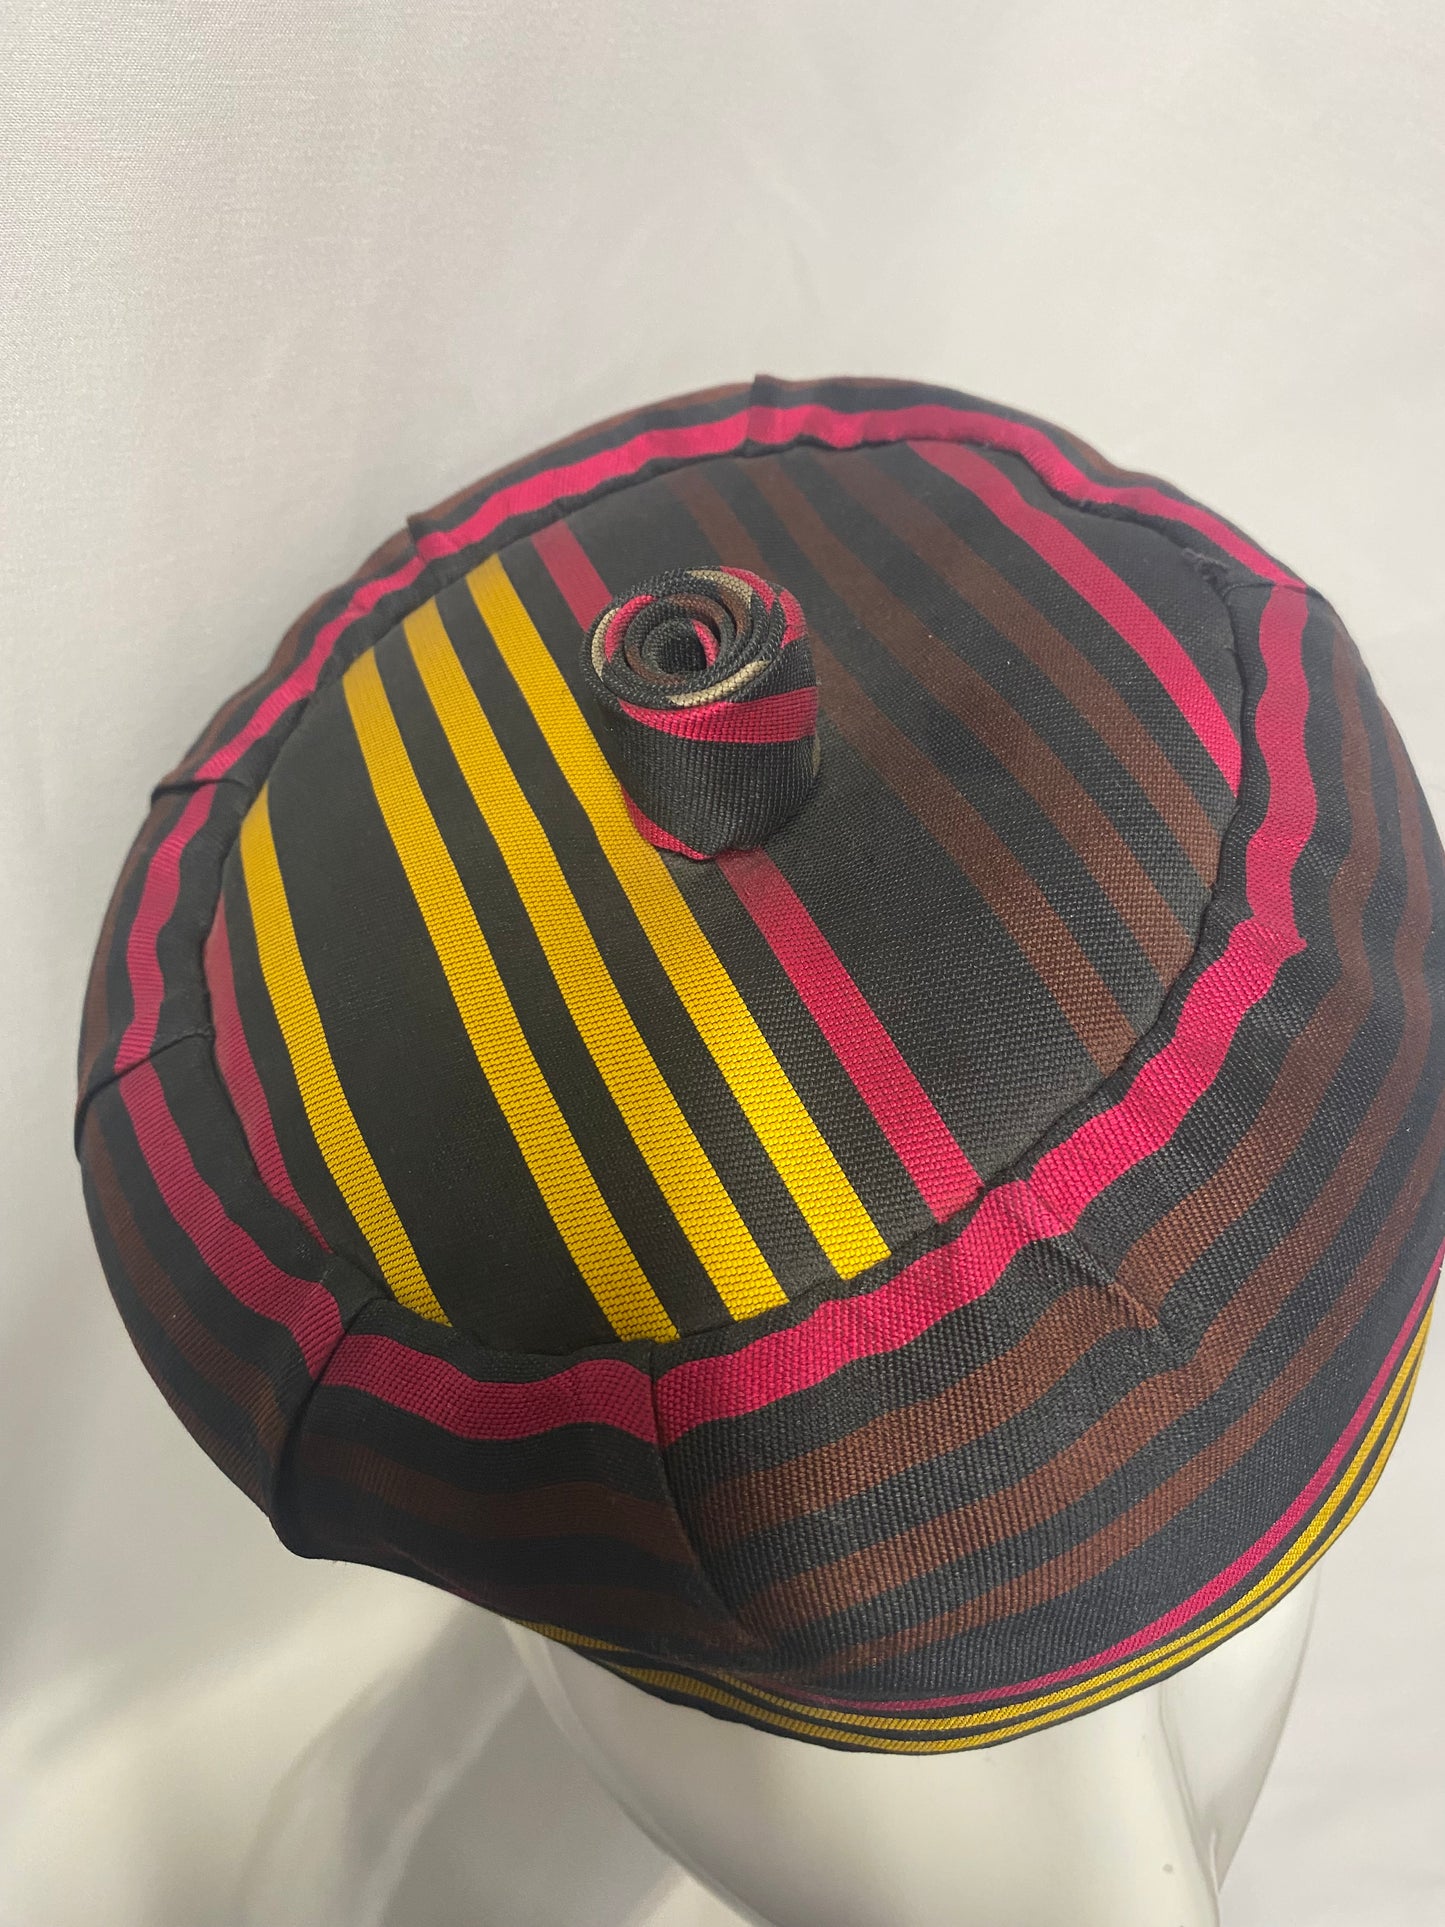 Bessies Vintage Black Pink Yellow Pillbox Hat with Comb